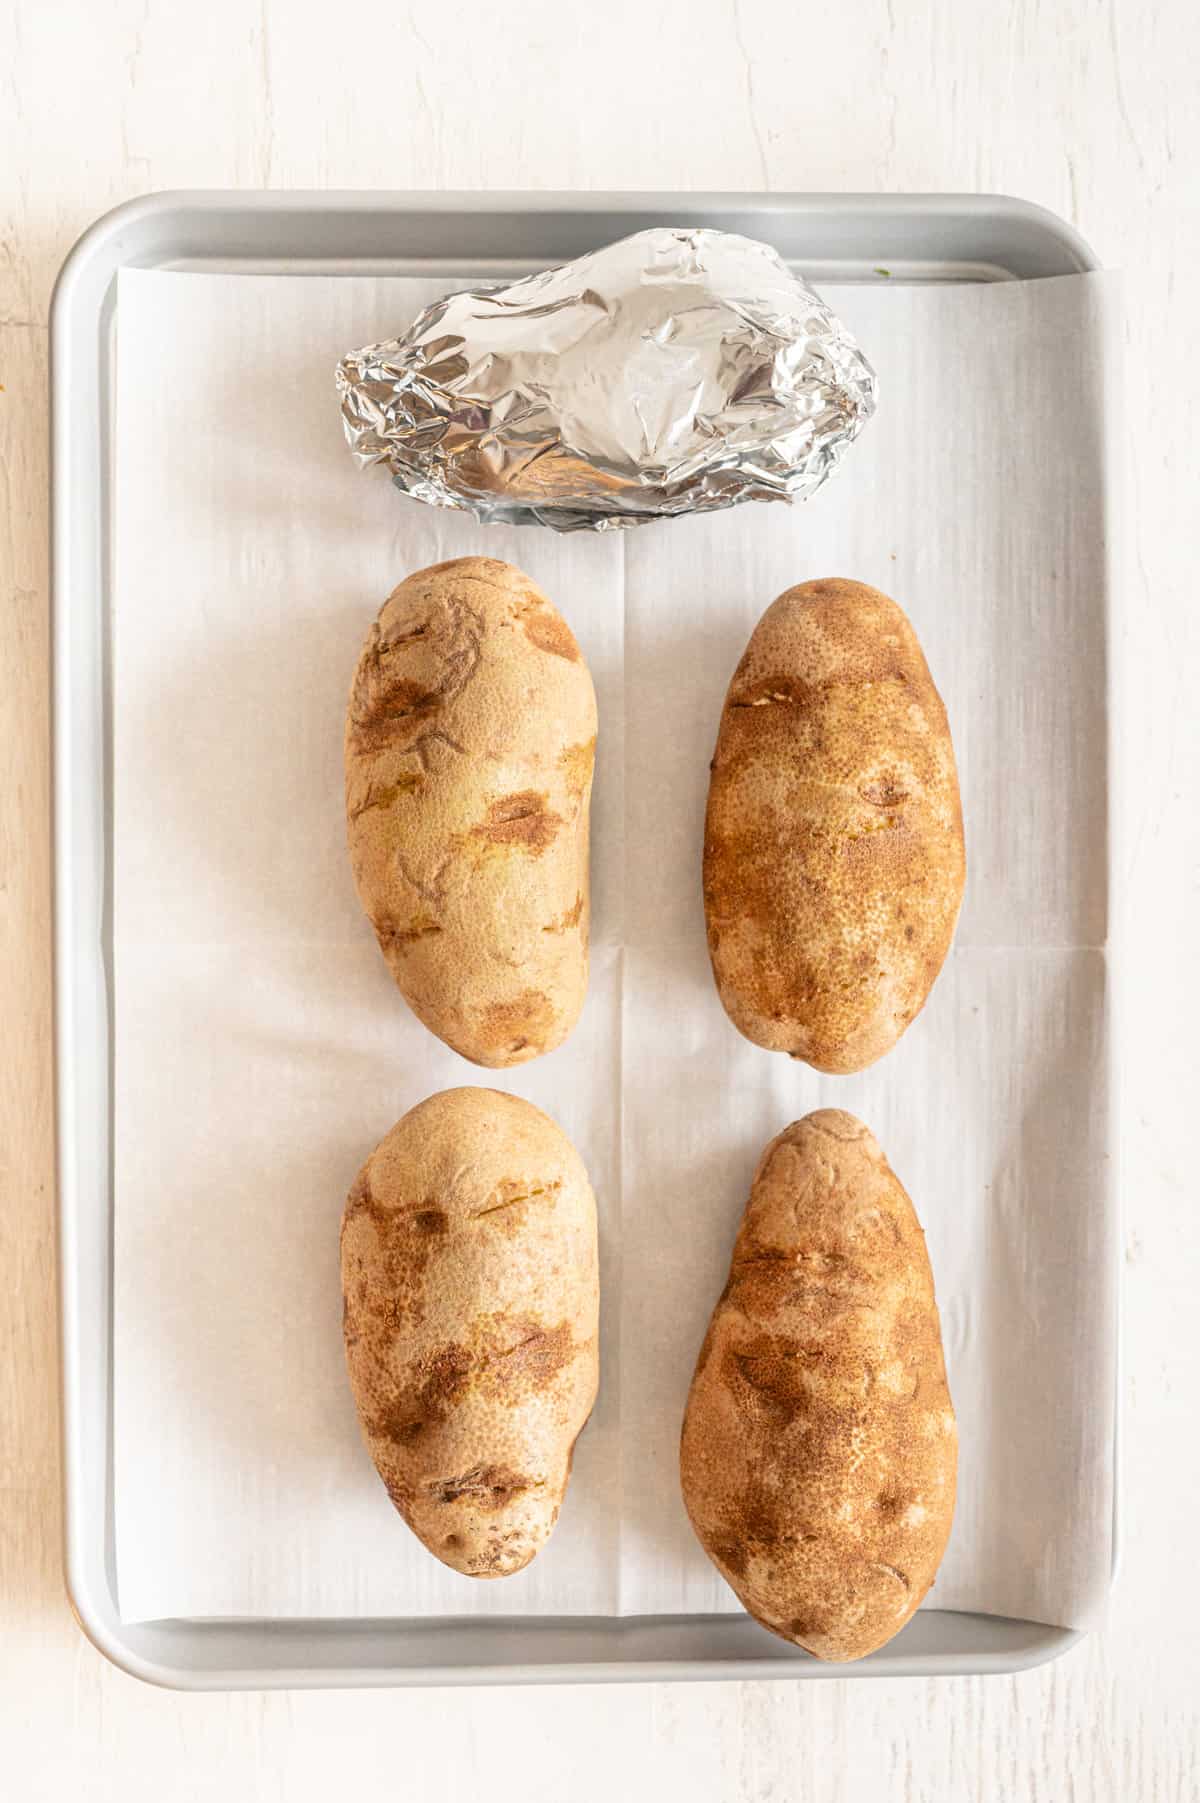 Potatoes on a baking sheet lined with parchment paper.